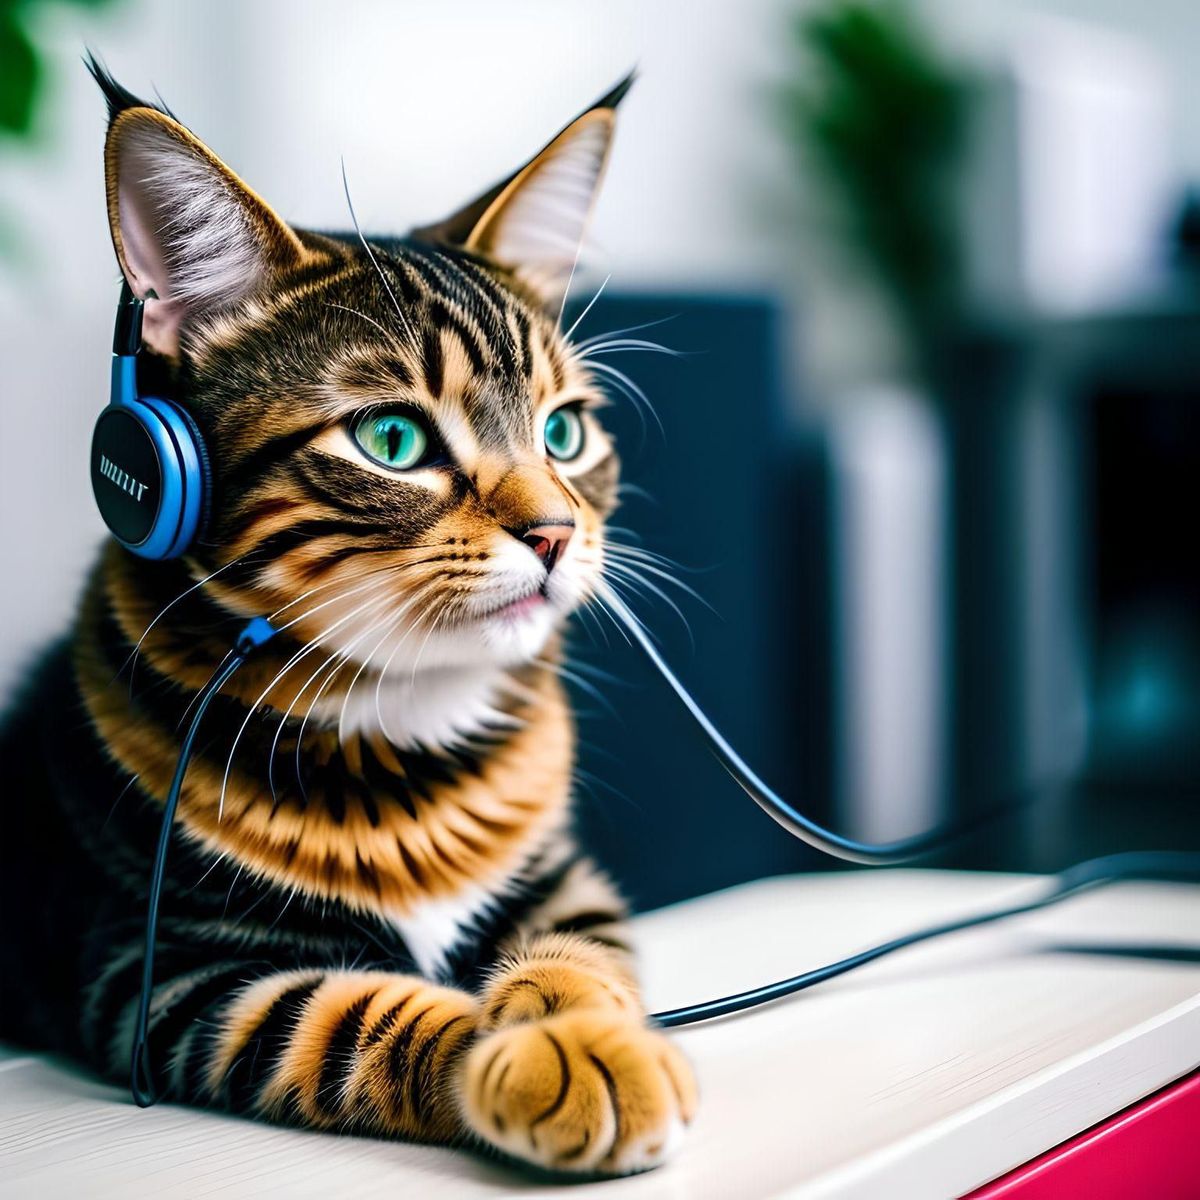 An AI-generated image of a cat listening to music on headphones